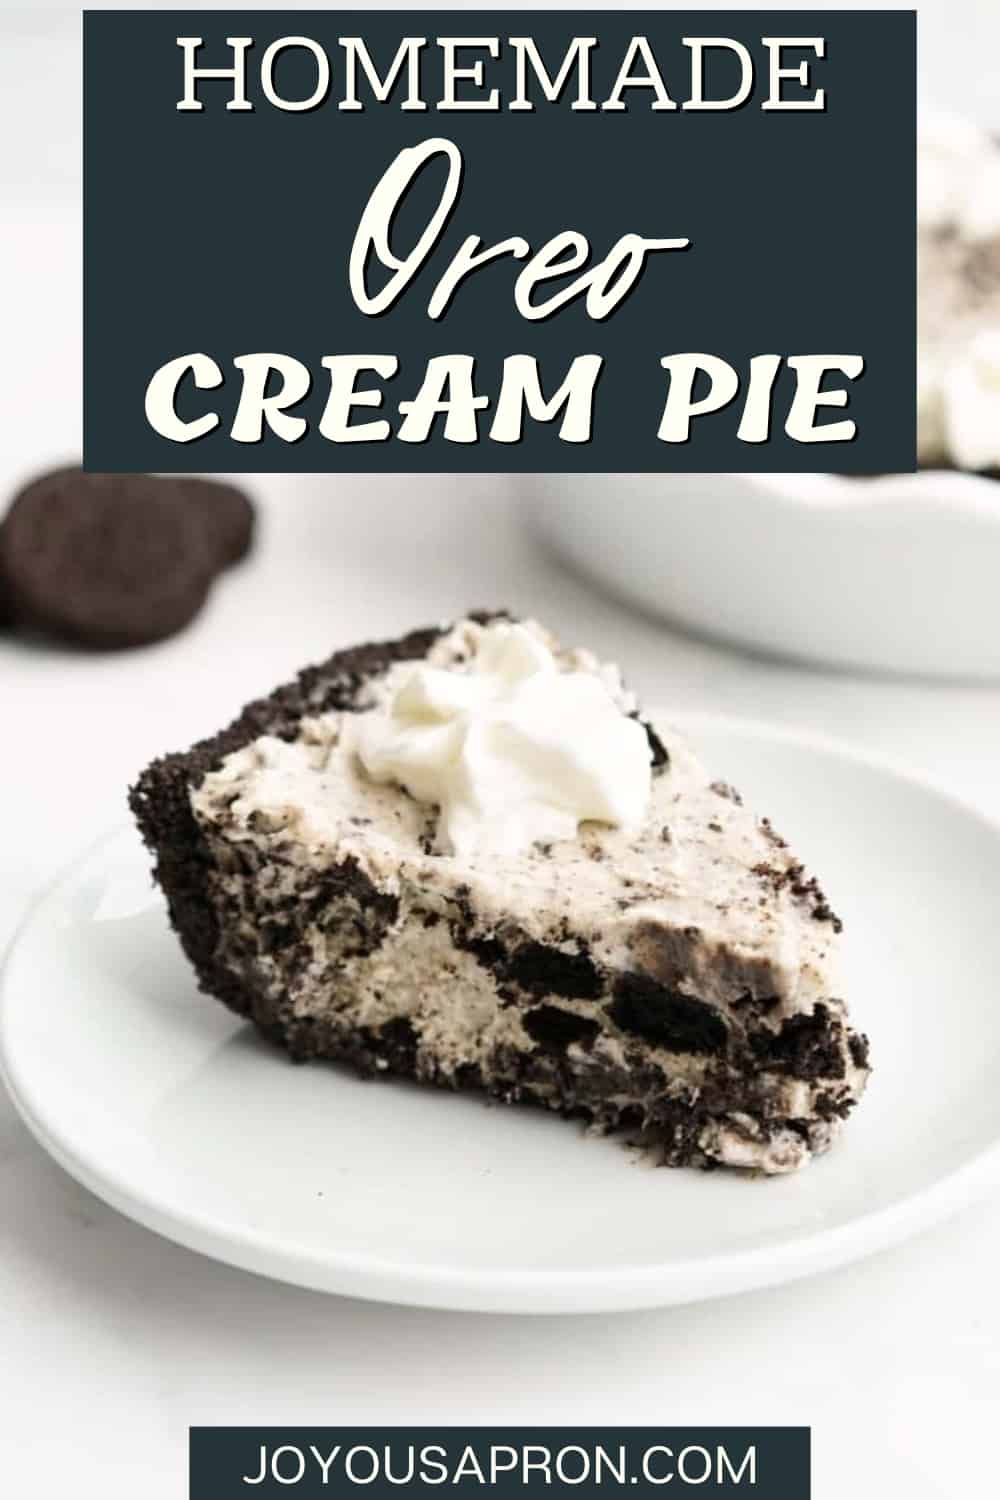 Oreo Cream Pie - this cookies and cream pie features rich and creamy Oreo cream filling with a crumbly Oreo crust. Topped with whipped cream, this is a tasty and well-loved all American dessert and sweet treat! via @joyousapron